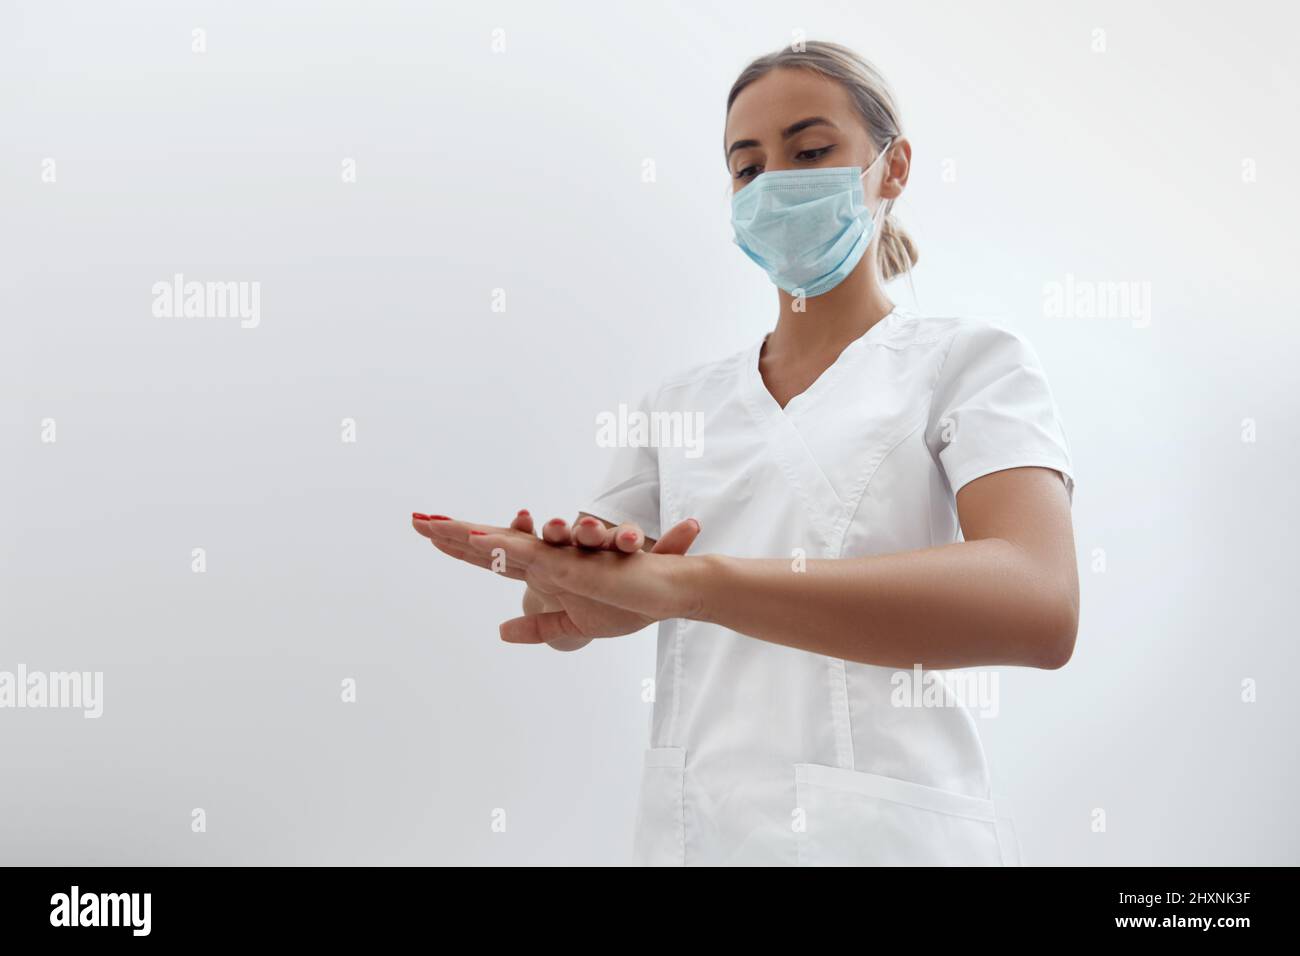 Close Up Of Medical Staff Washing Hands.Disinfect their Hands Before Surgery. Stock Photo